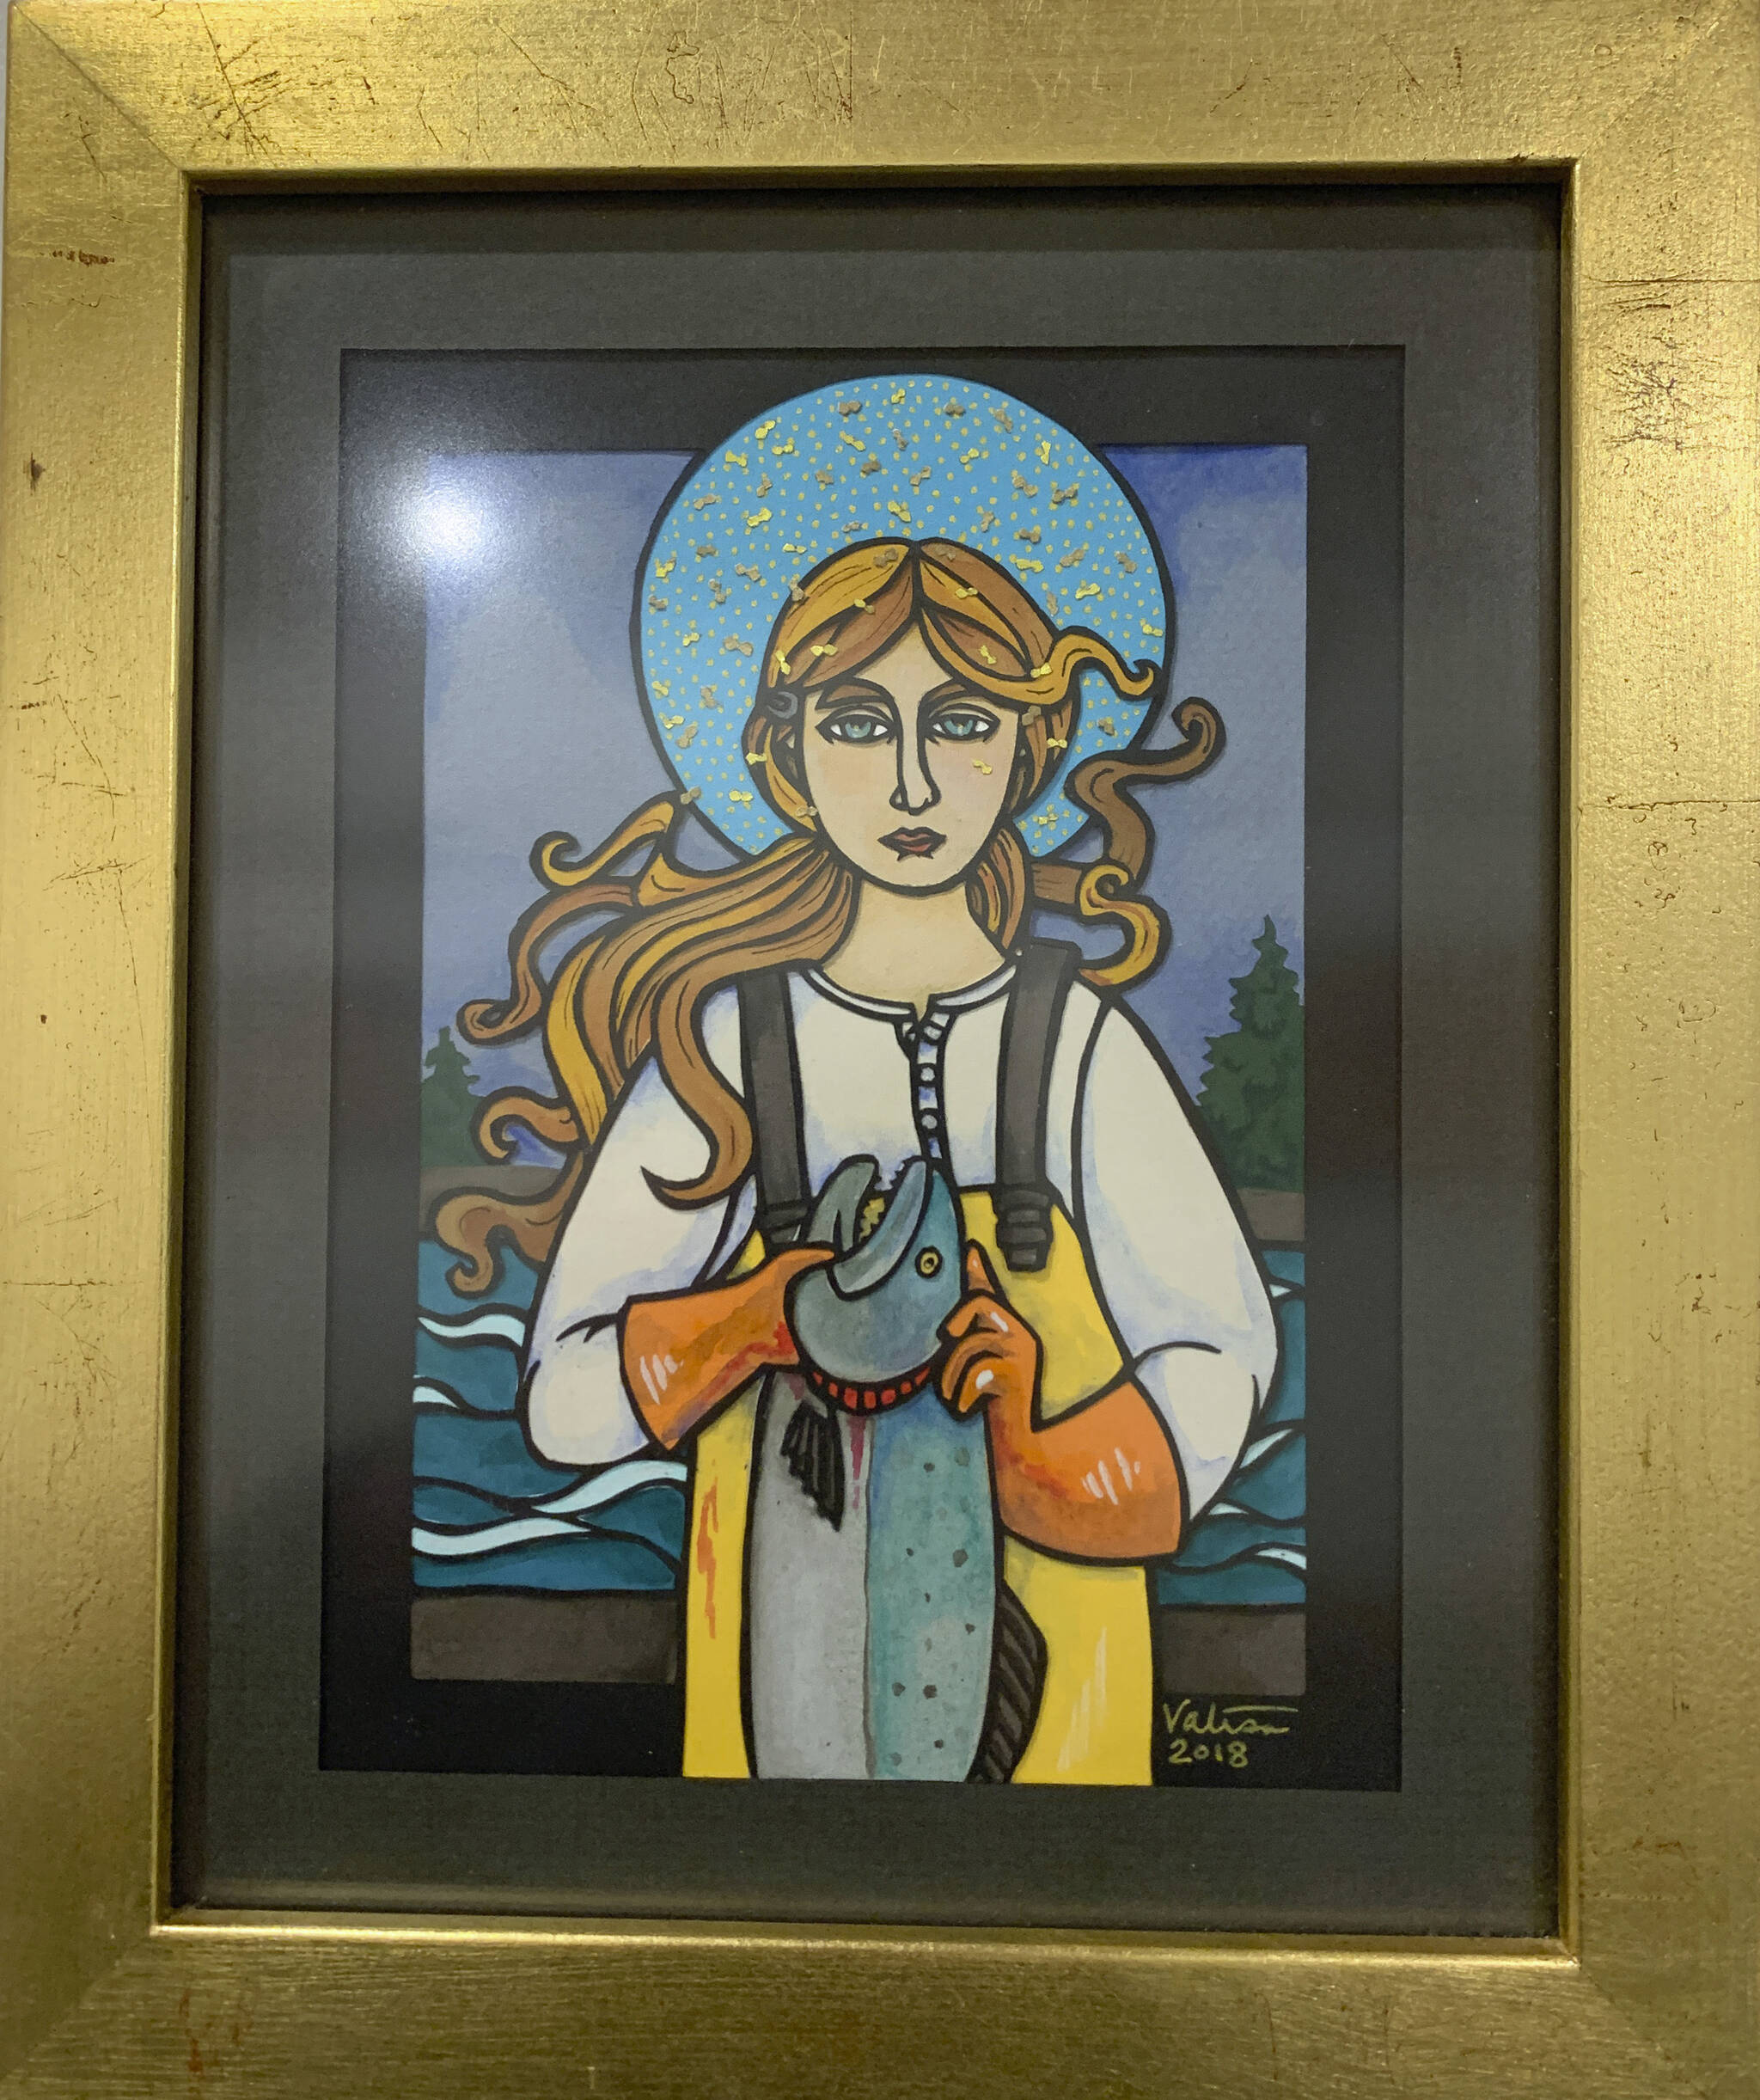 Valisa Higman’s “Our Lady of the Lagoon” is part of the Pratt Museum & Park’s show “Salmon Culture: Kachemak Bay Connections.” (Photo by Christina Whiting)